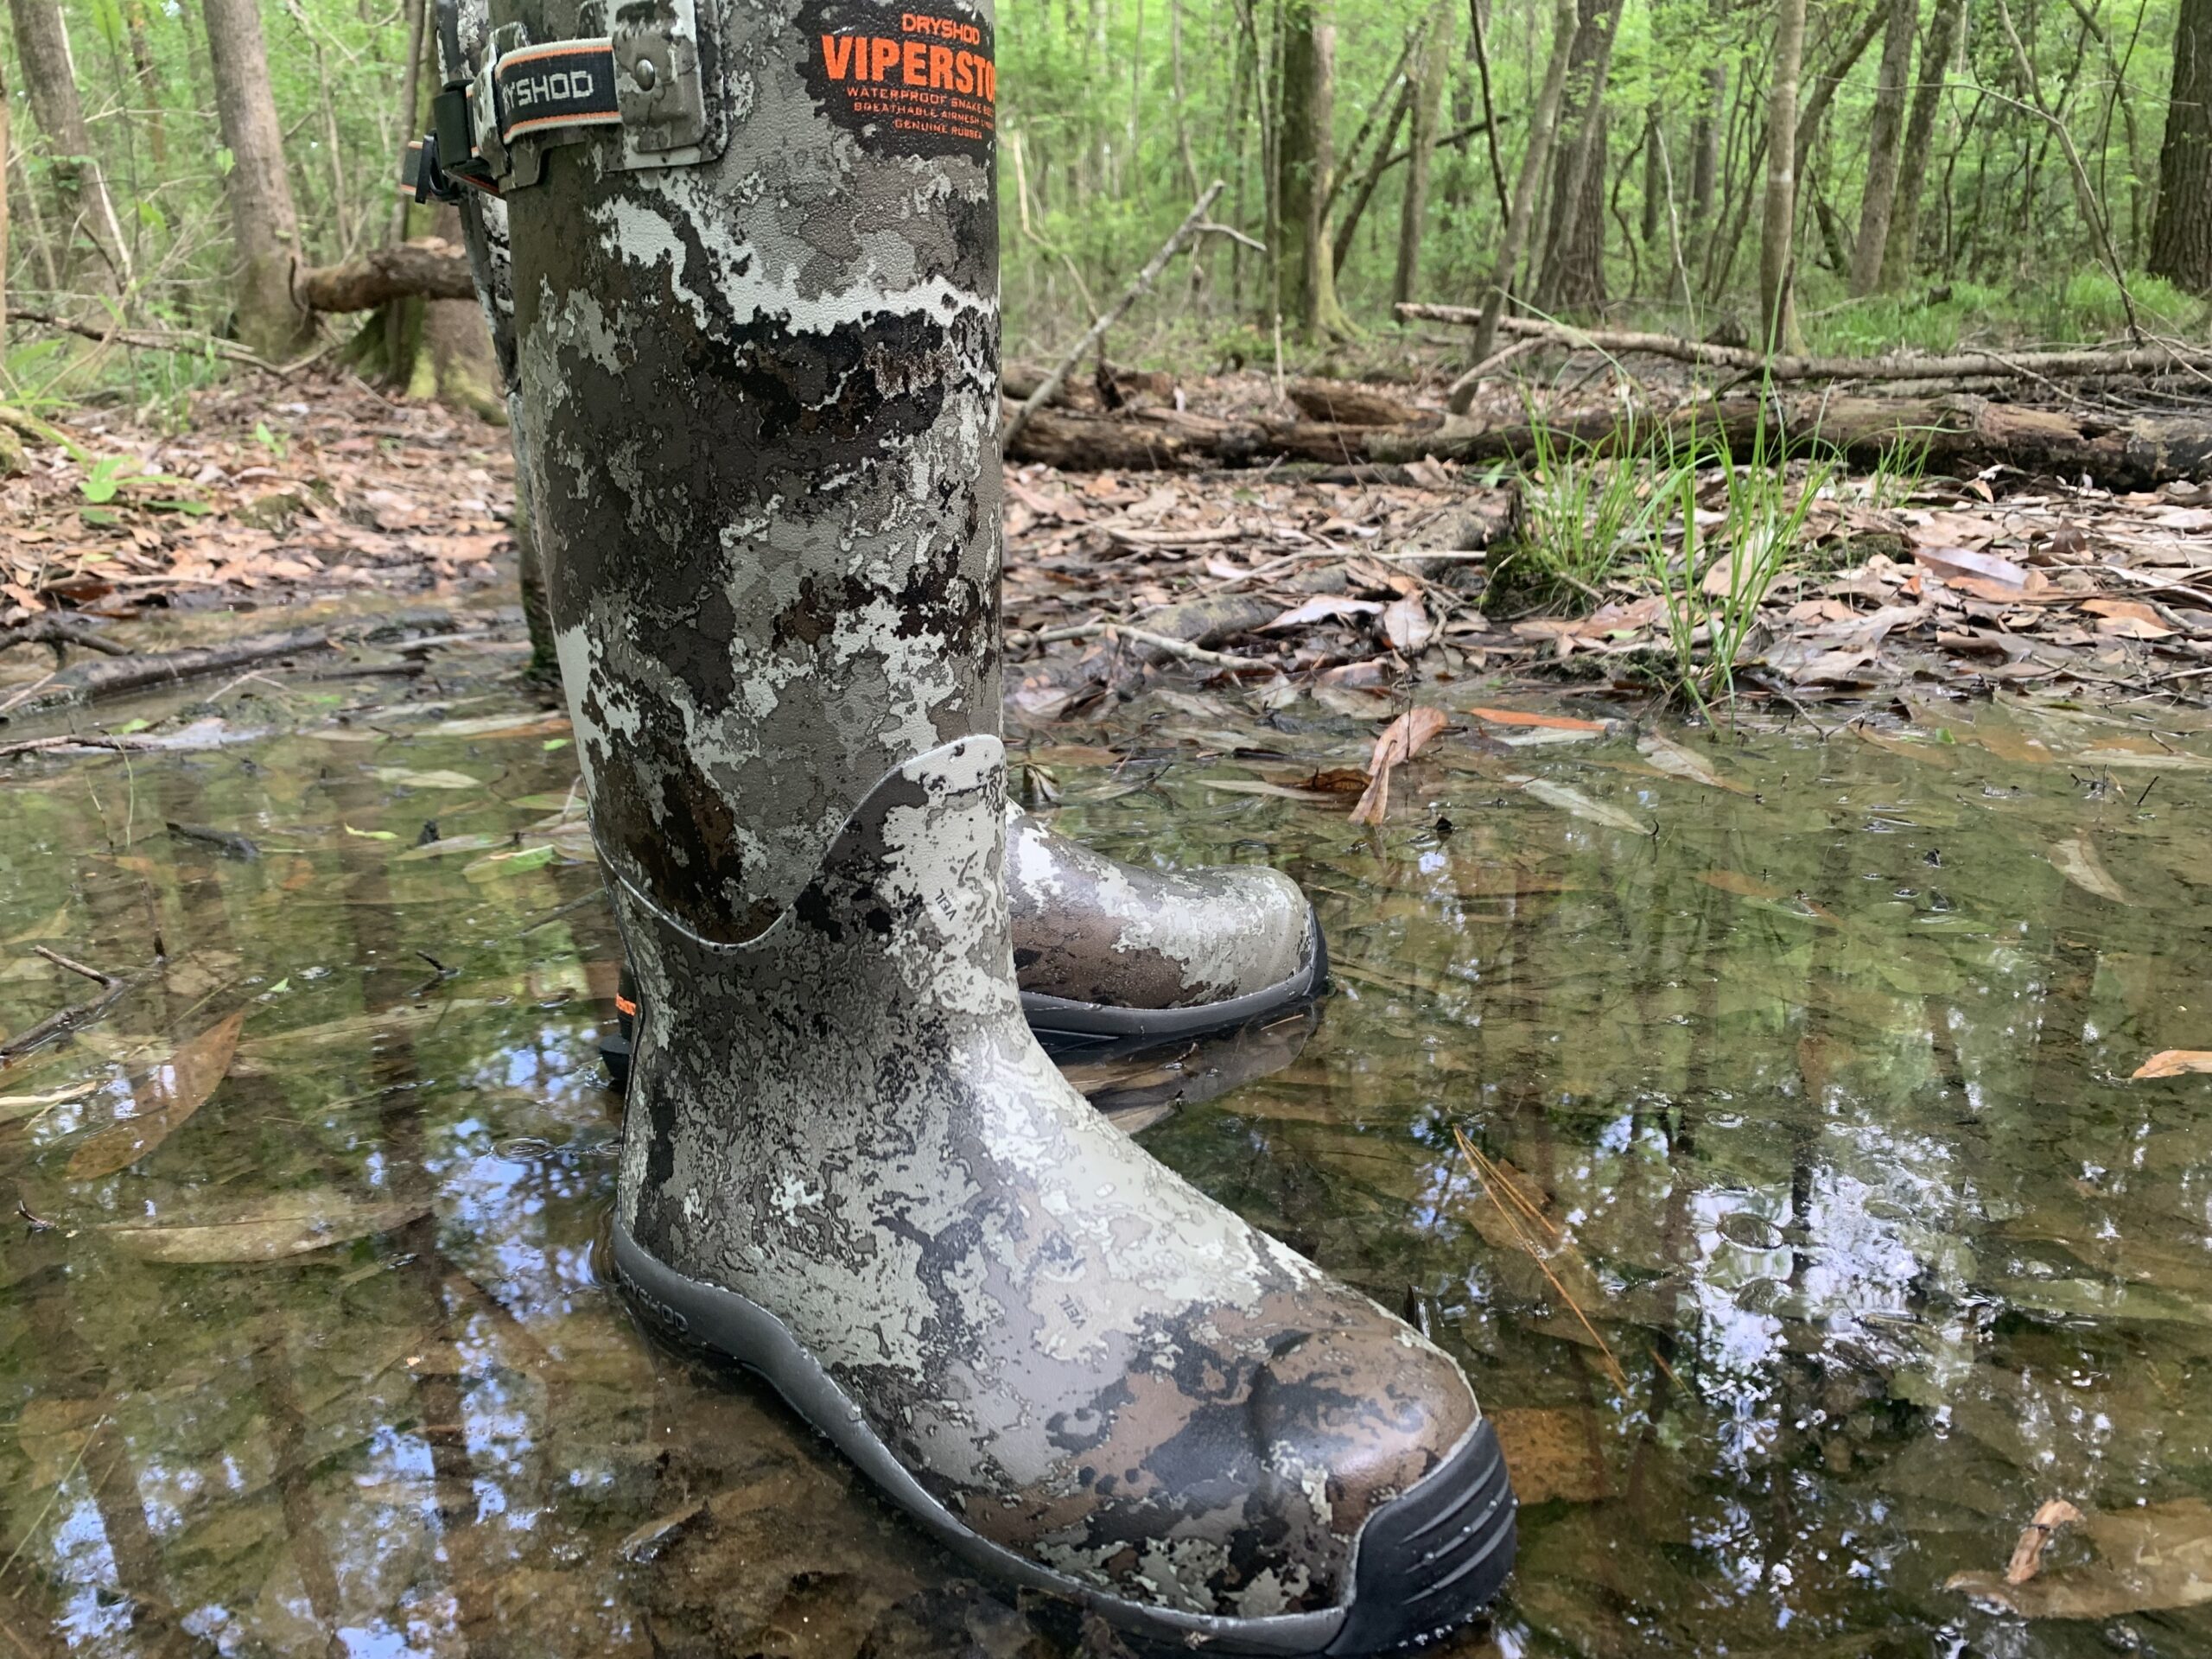 The Dryshod Viperstops are Outdoor Life's pick for best snake boot.